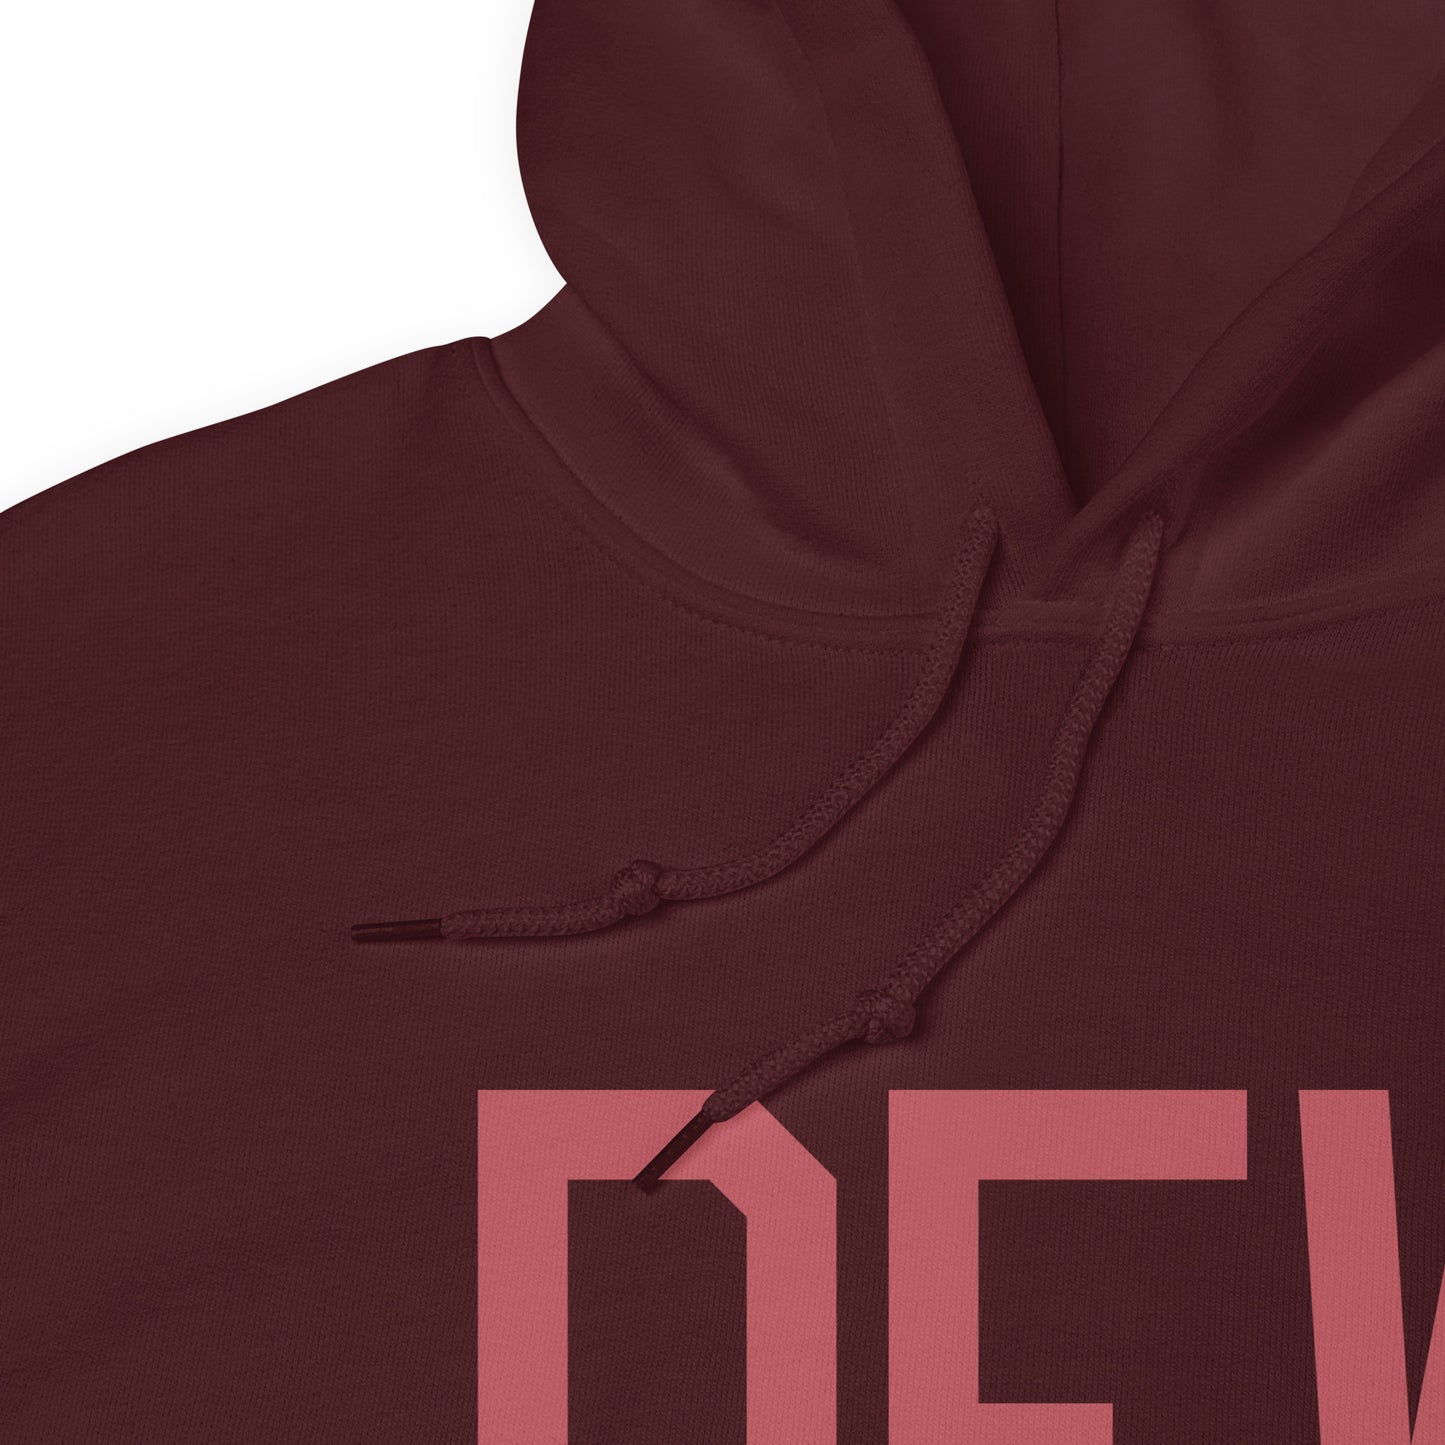 Aviation Enthusiast Hoodie - Deep Pink Graphic • DFW Dallas • YHM Designs - Image 08